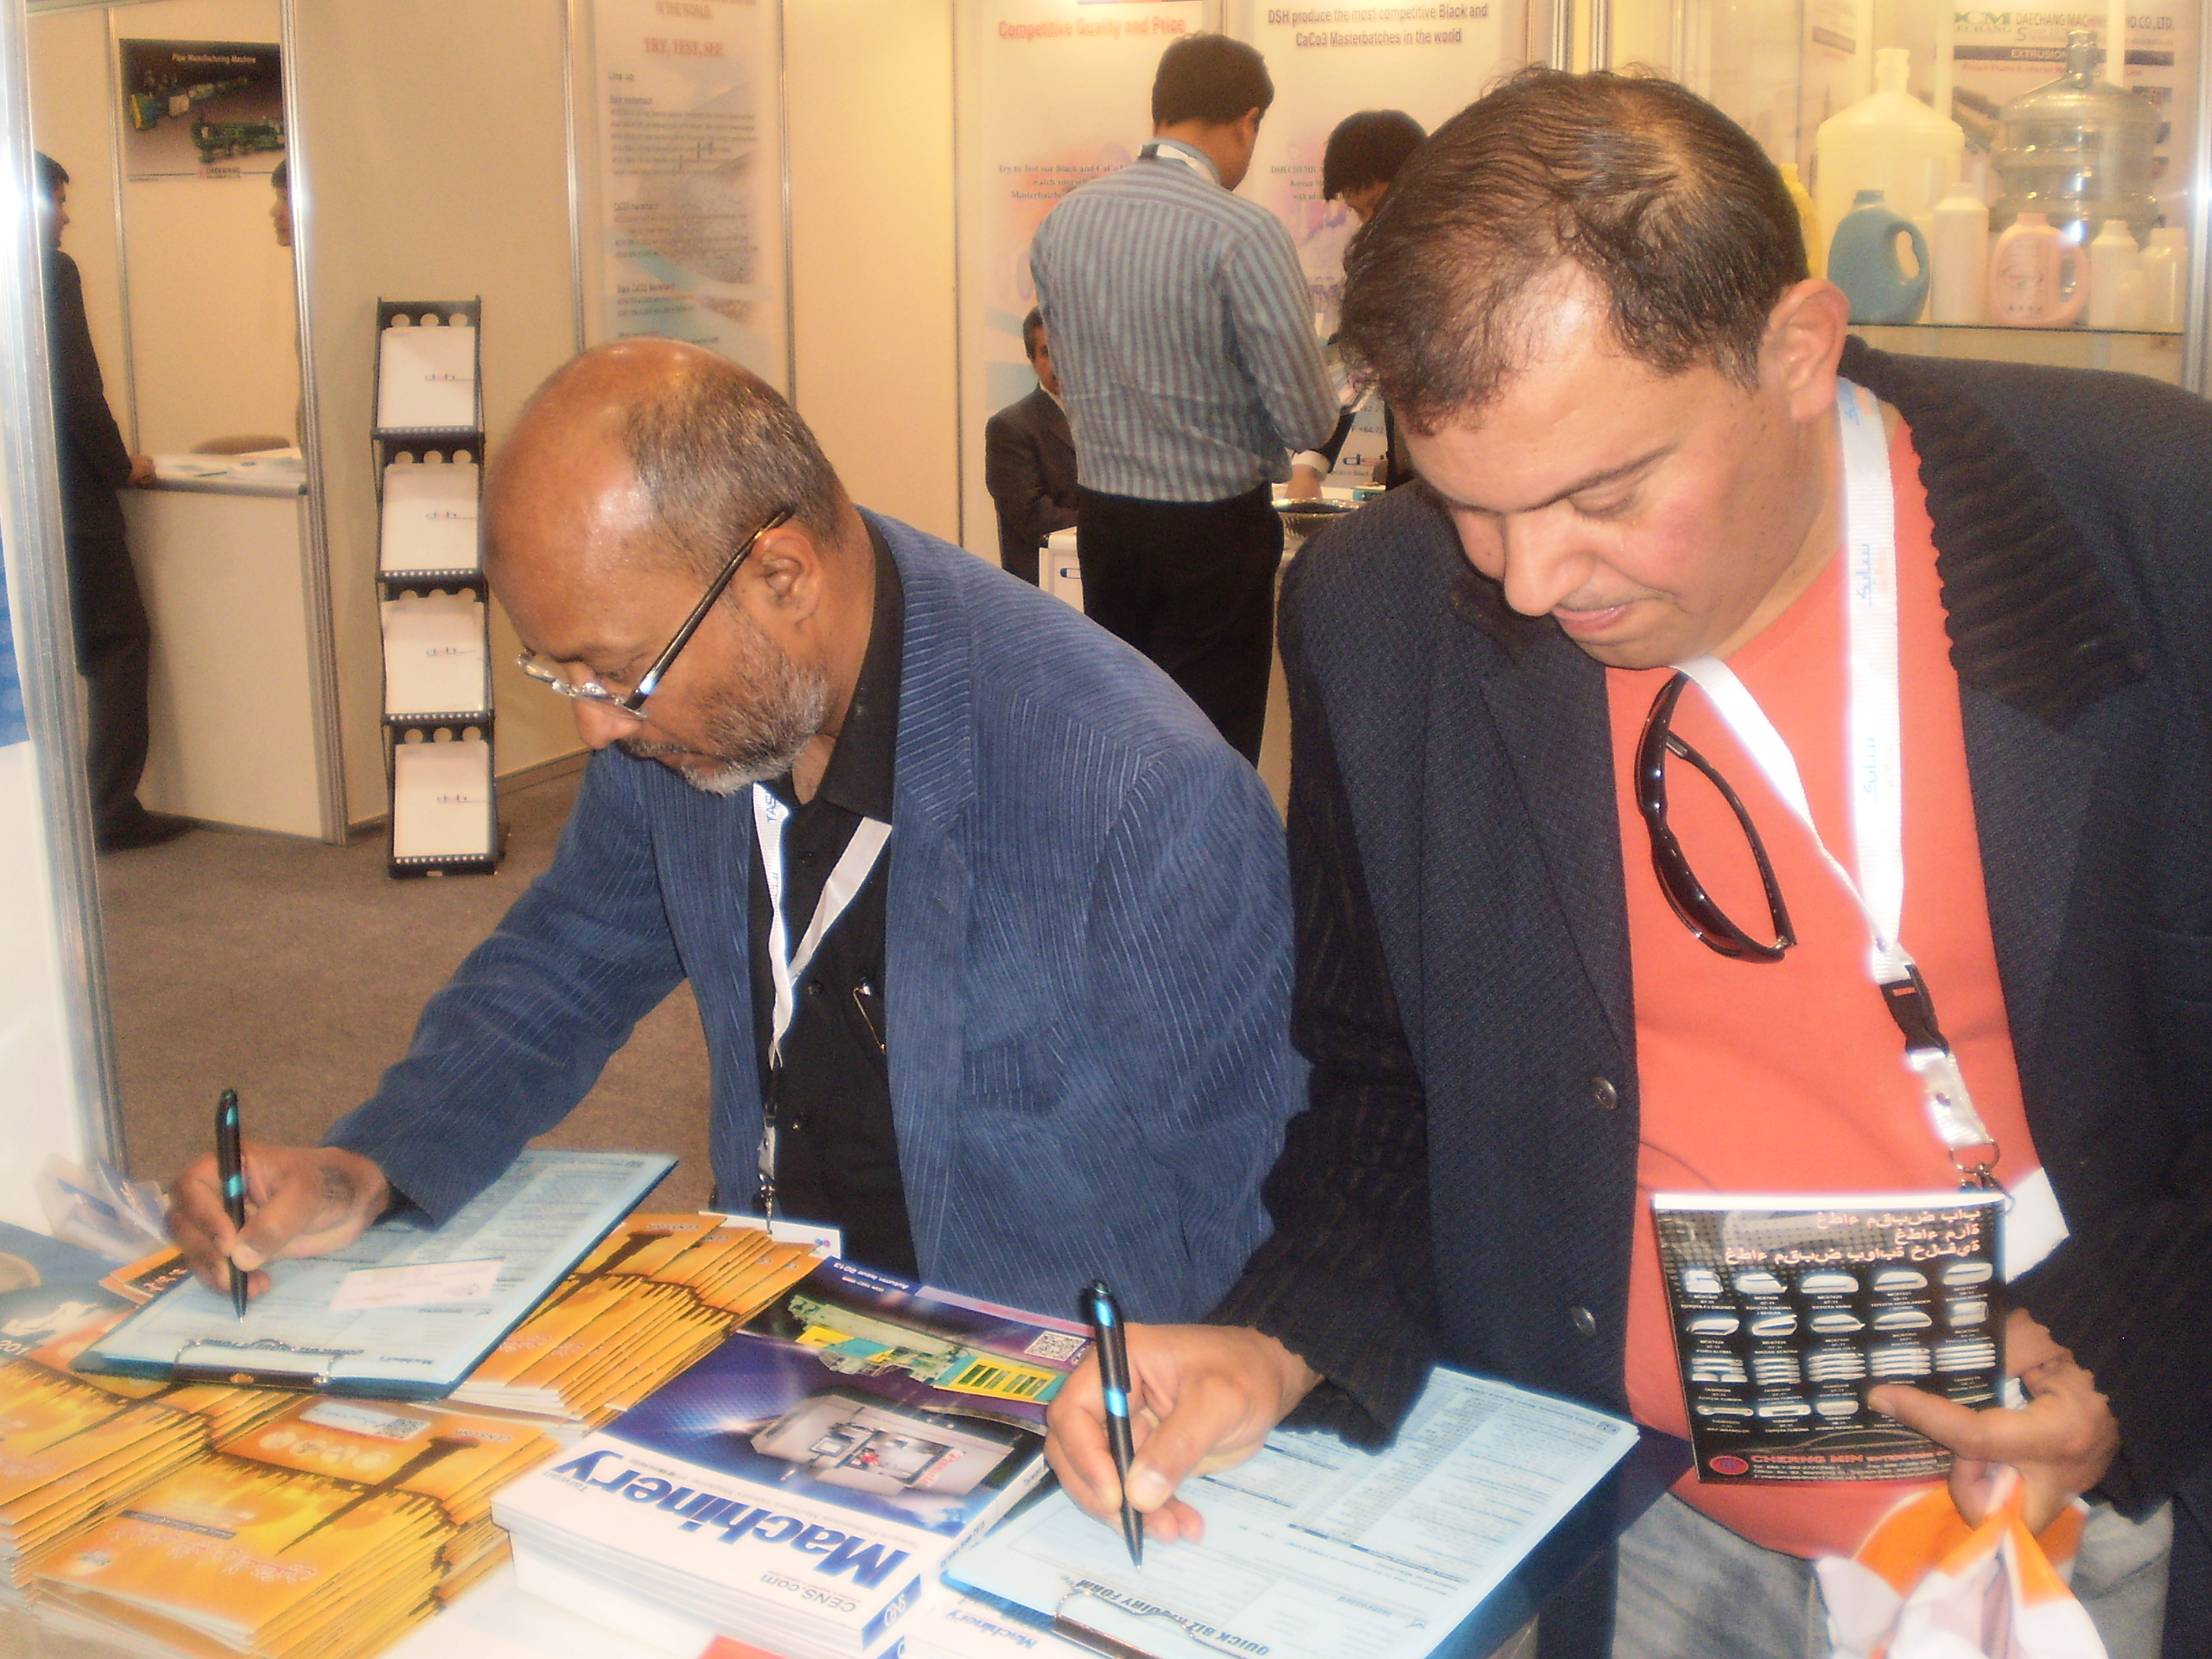 Buyers fill out CENS inqiry forms at Saudi Plastics and Petrochem.